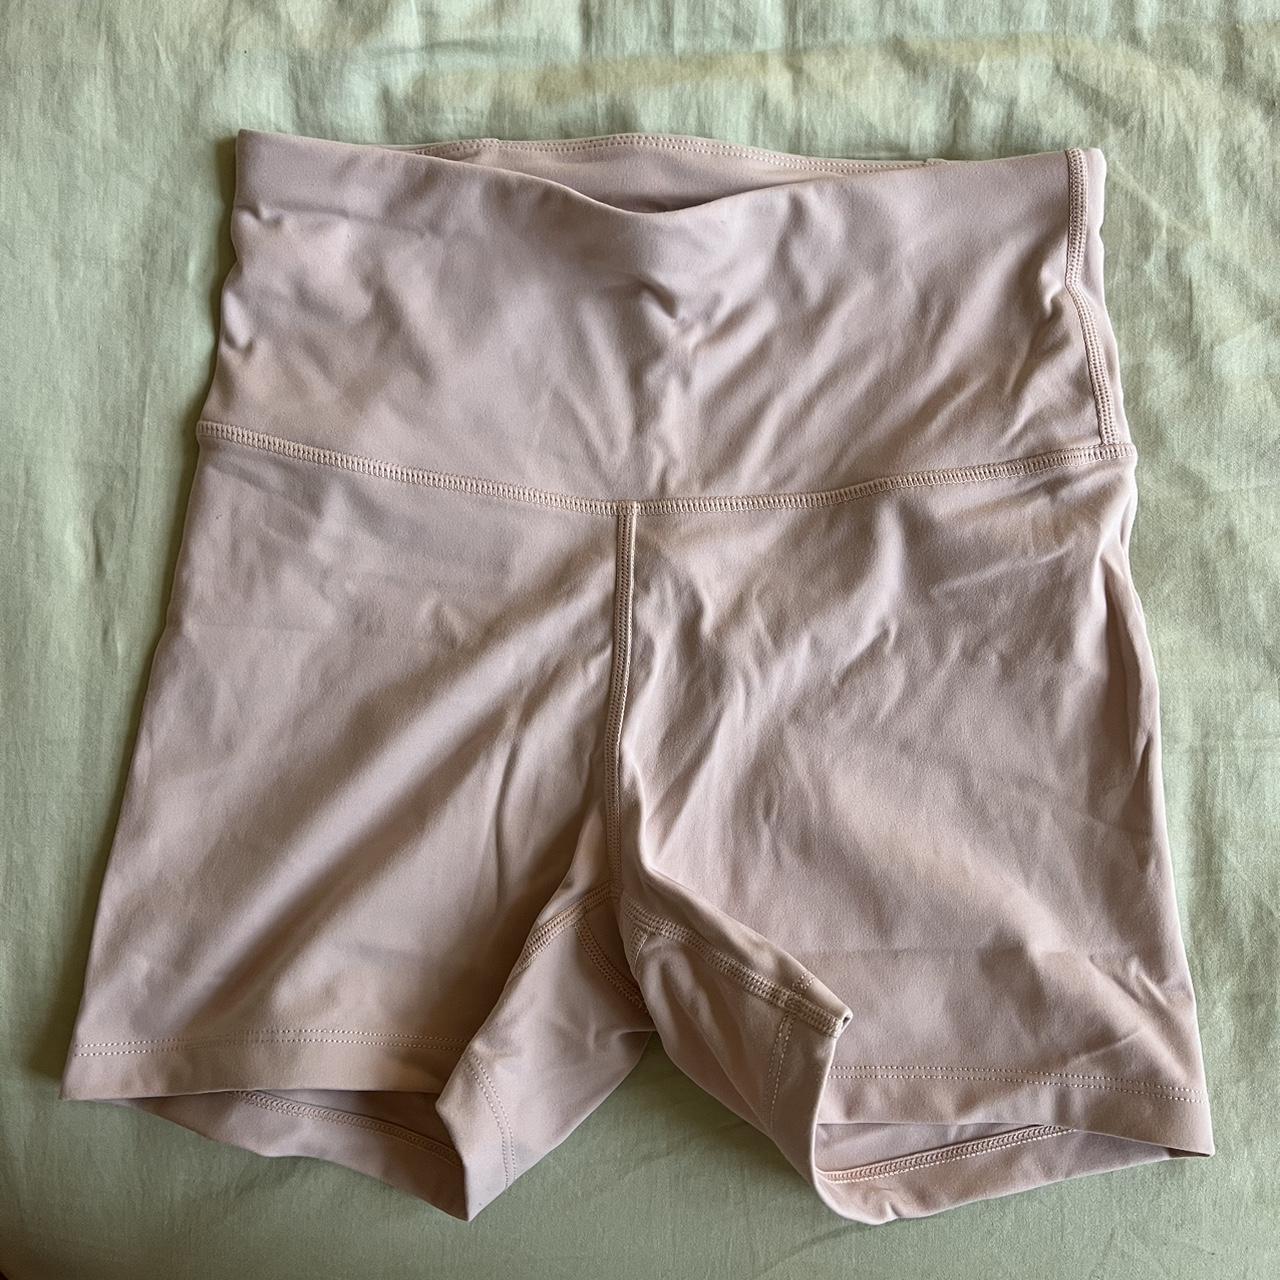 Tala skinluxe high waisted cycle shorts and high - Depop